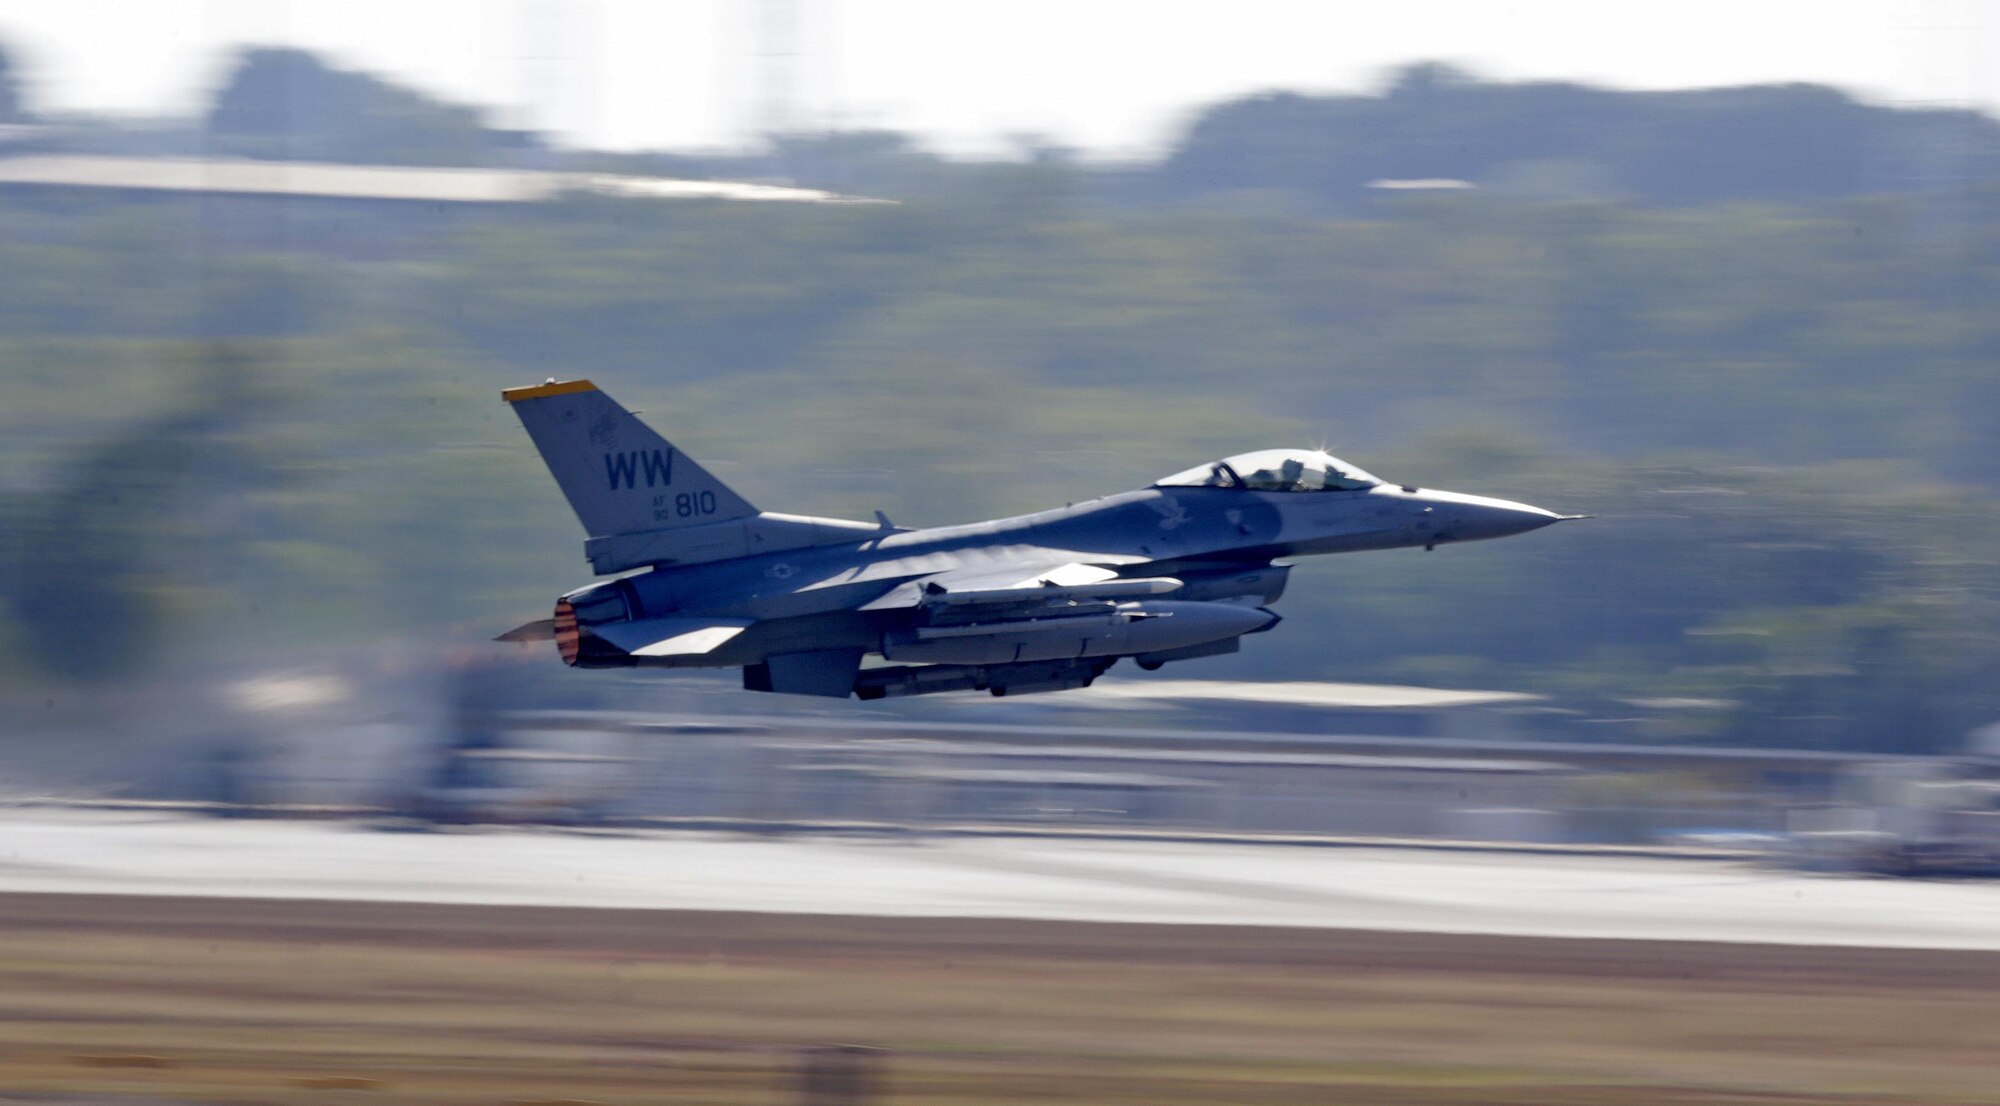 A U.S. Air Force F-16C takes off from Royal Australian Air Force (RAAF) Base Darwin as part of Exercise PITCH BLACK 16 (PB16). PB16 allows participant nations to exercise deployed units in the tasking, planning and execution of Offensive Counter Air and Offensive Air Support while utilizing one of the largest training airspace areas in the world.  The exercise is scheduled from July 29 to Aug.19, 2016.  (Australian Defence Force photo by LSIS Jayson Tufrey)